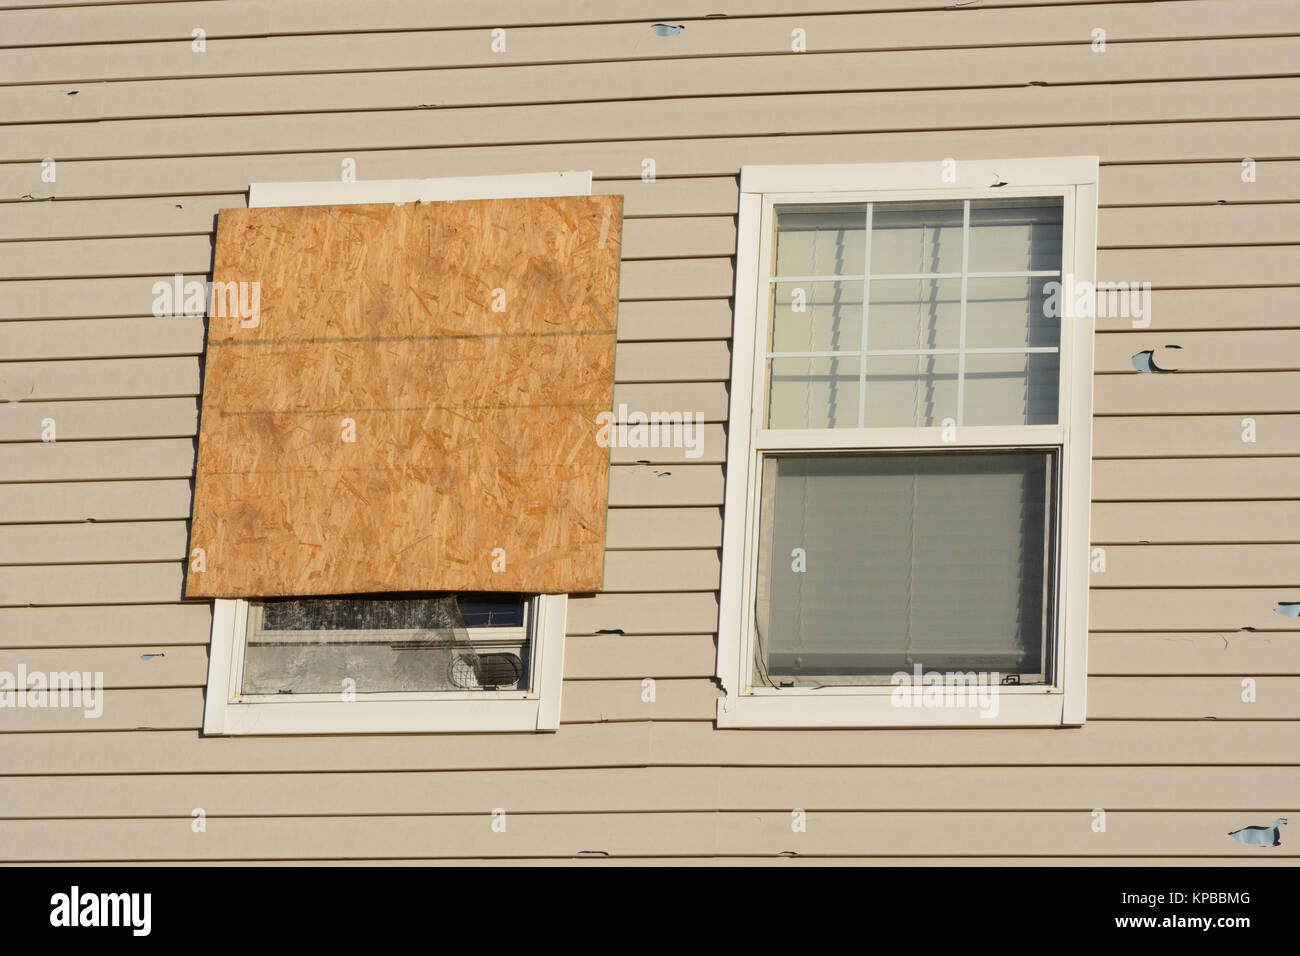 Boarded up window and hail storm damage on house siding and window frame Stock Photo